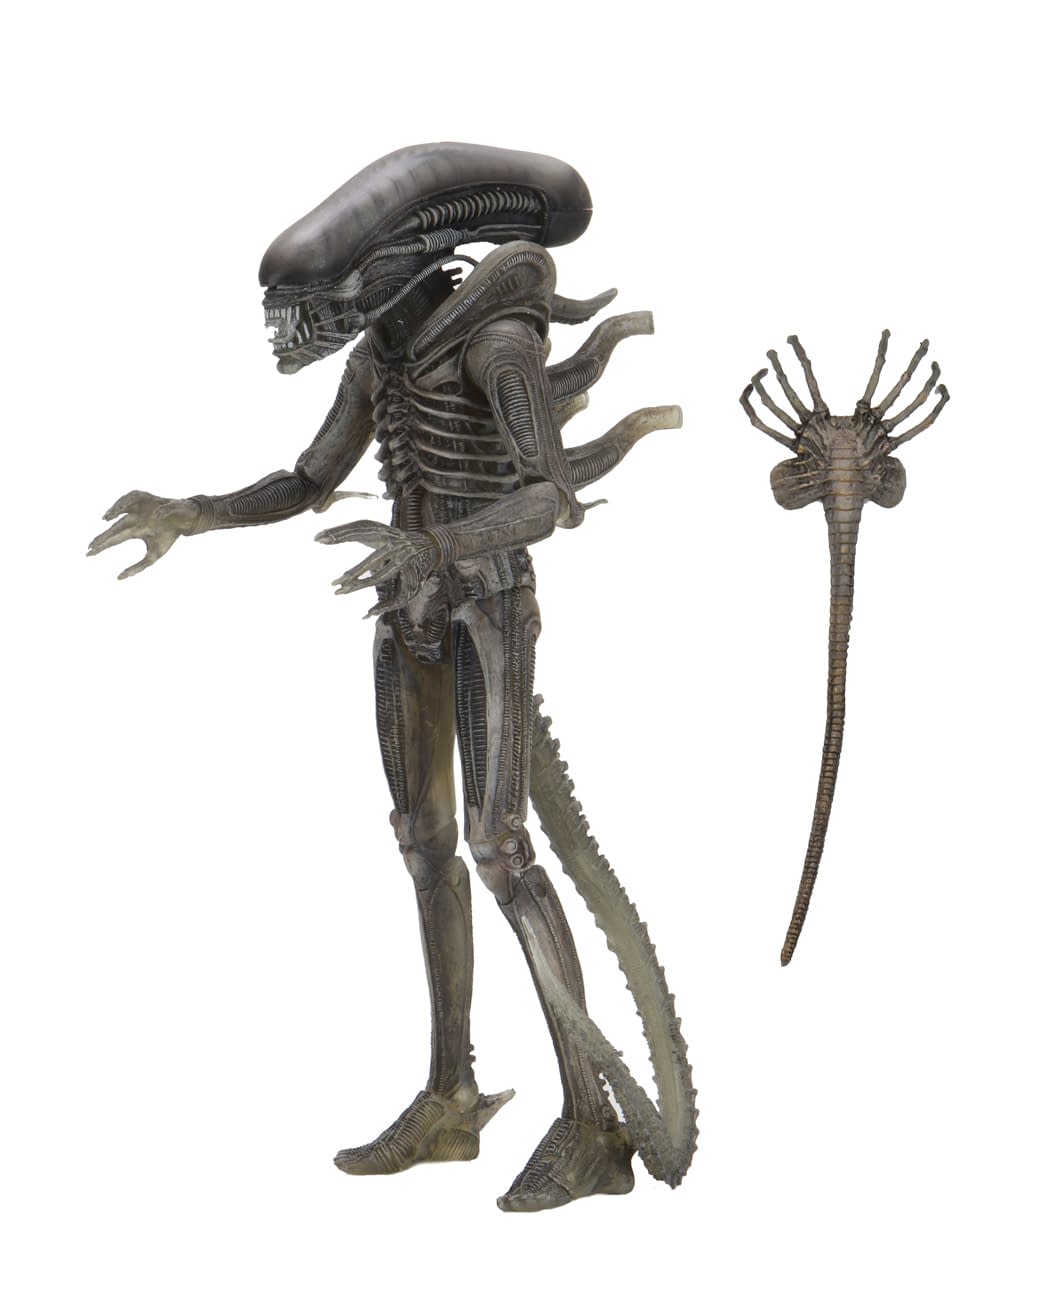 NECA Reveals Wave Four Of Their Alien 40th Anniversary Figures